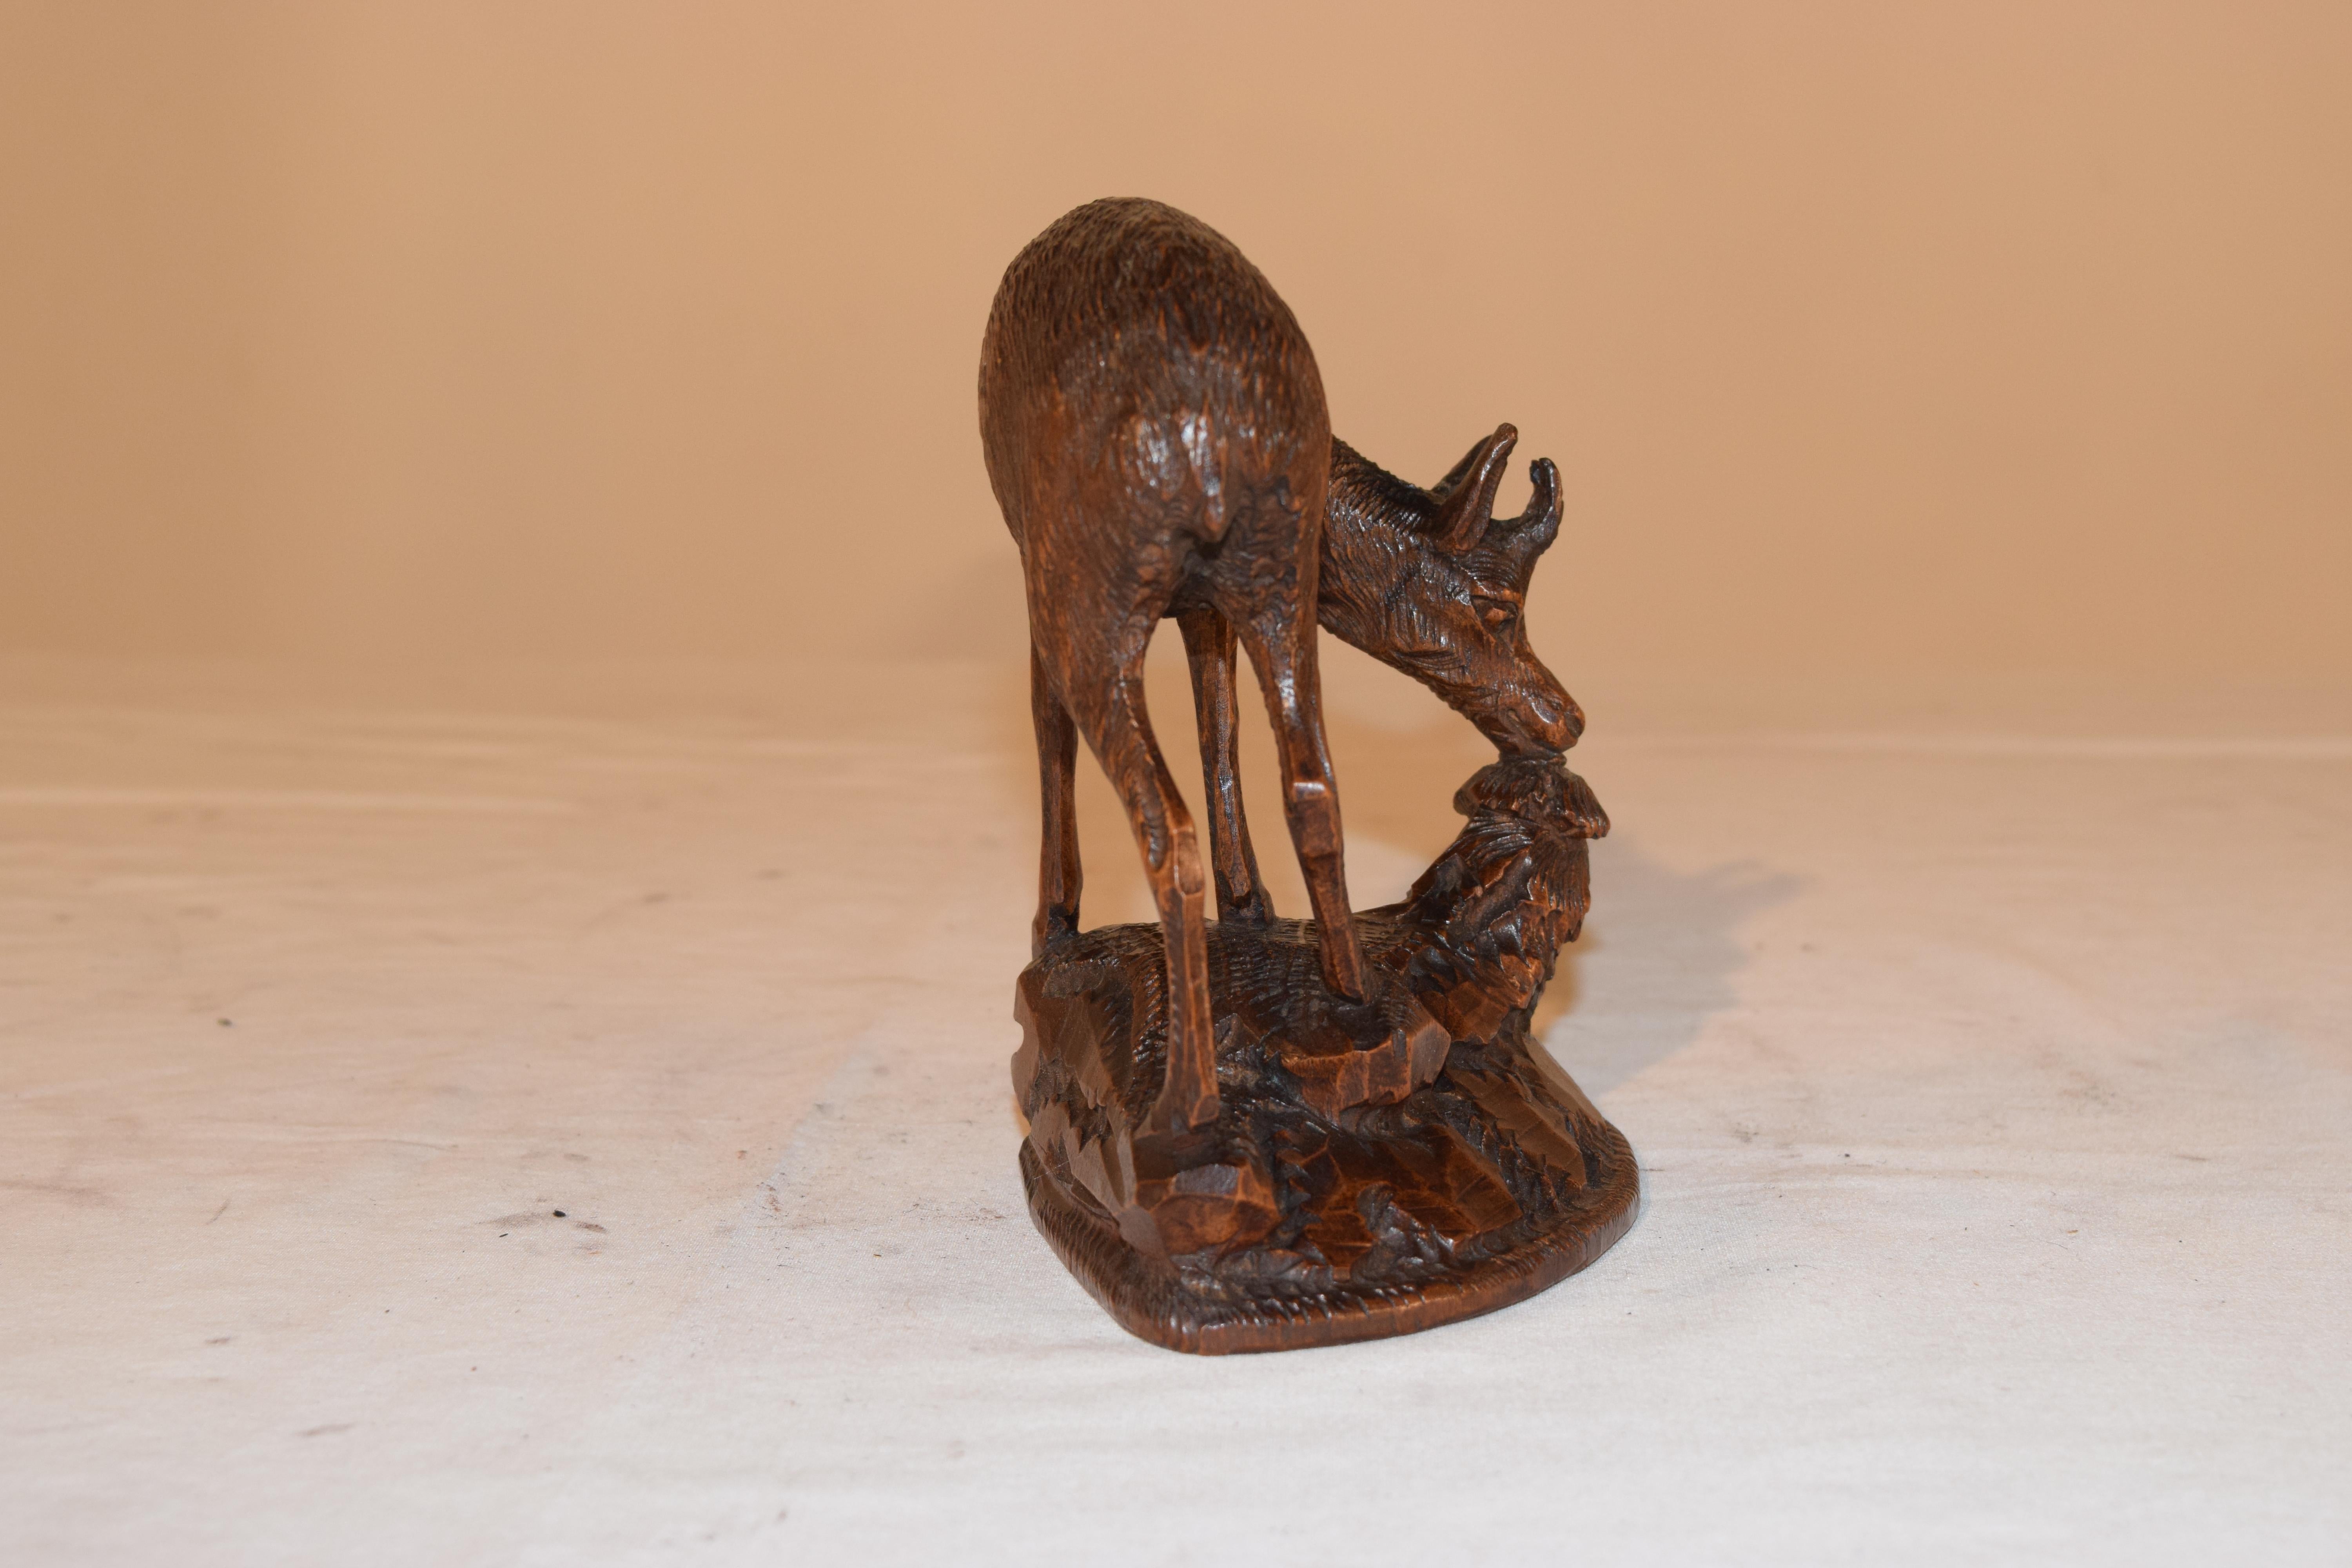 19th century Black Forest hand carved figure of a Chamois deer, bending down to eat foliage. The carving is lovely and in very good condition for its age.